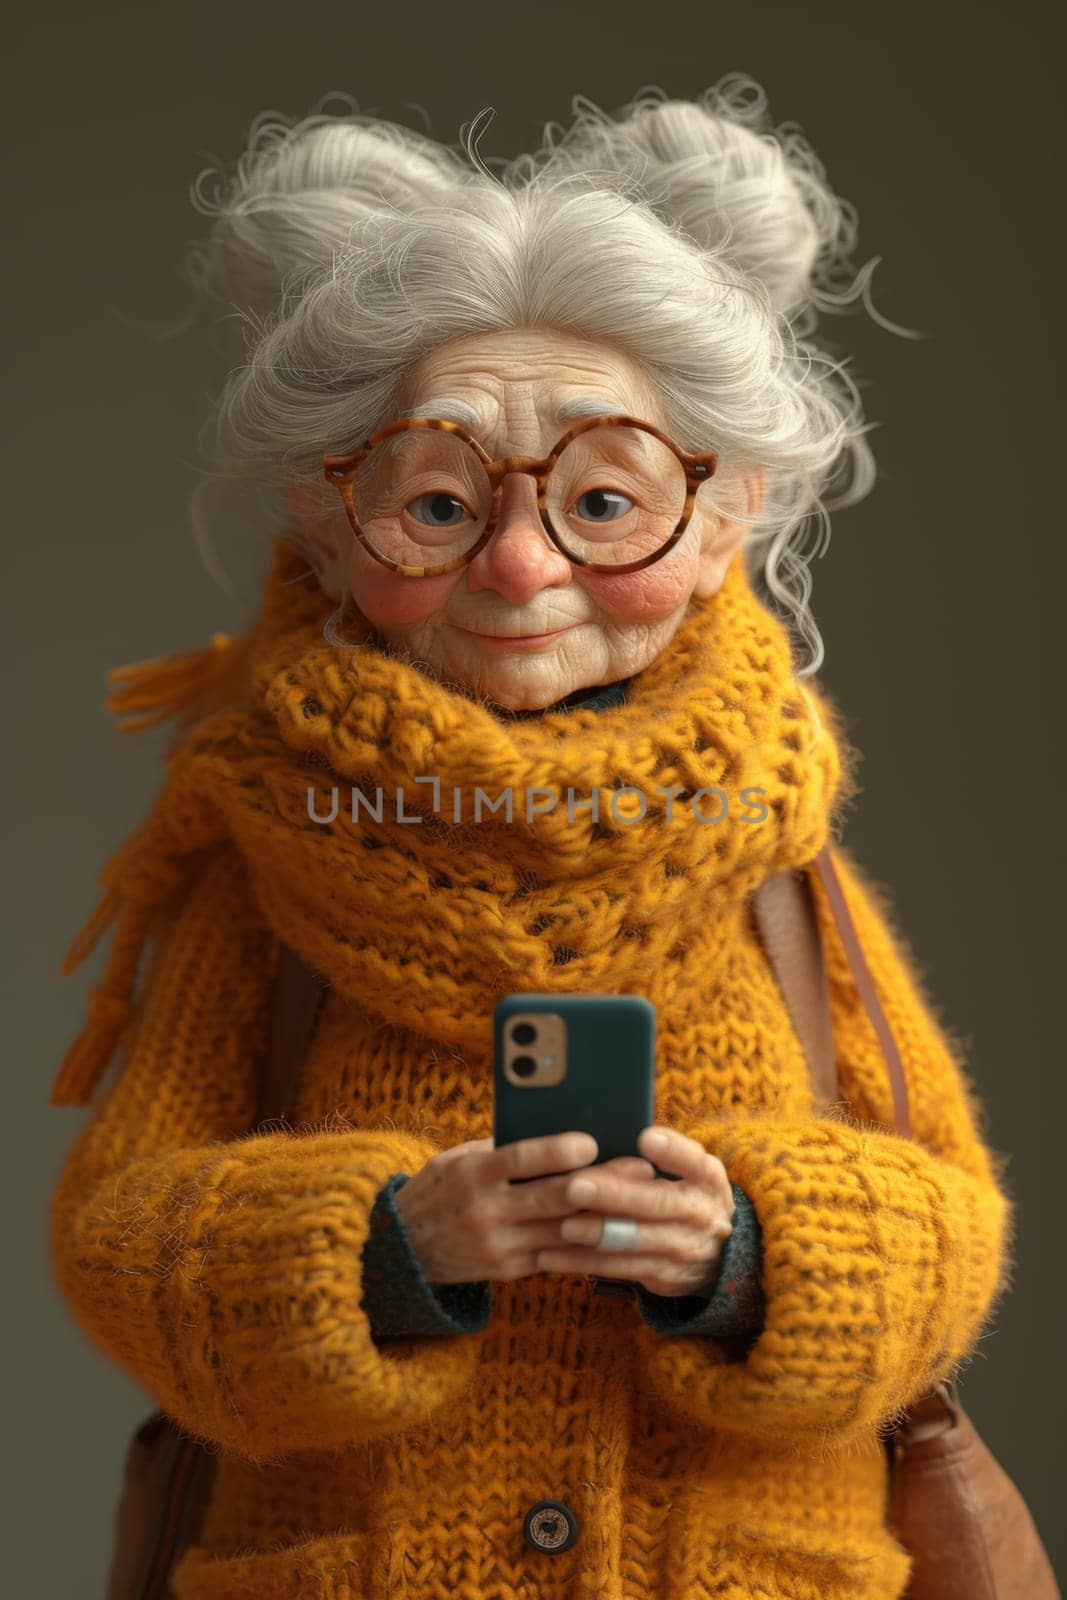 An elderly woman with glasses uses the Internet from her smartphone. 3d illustration.